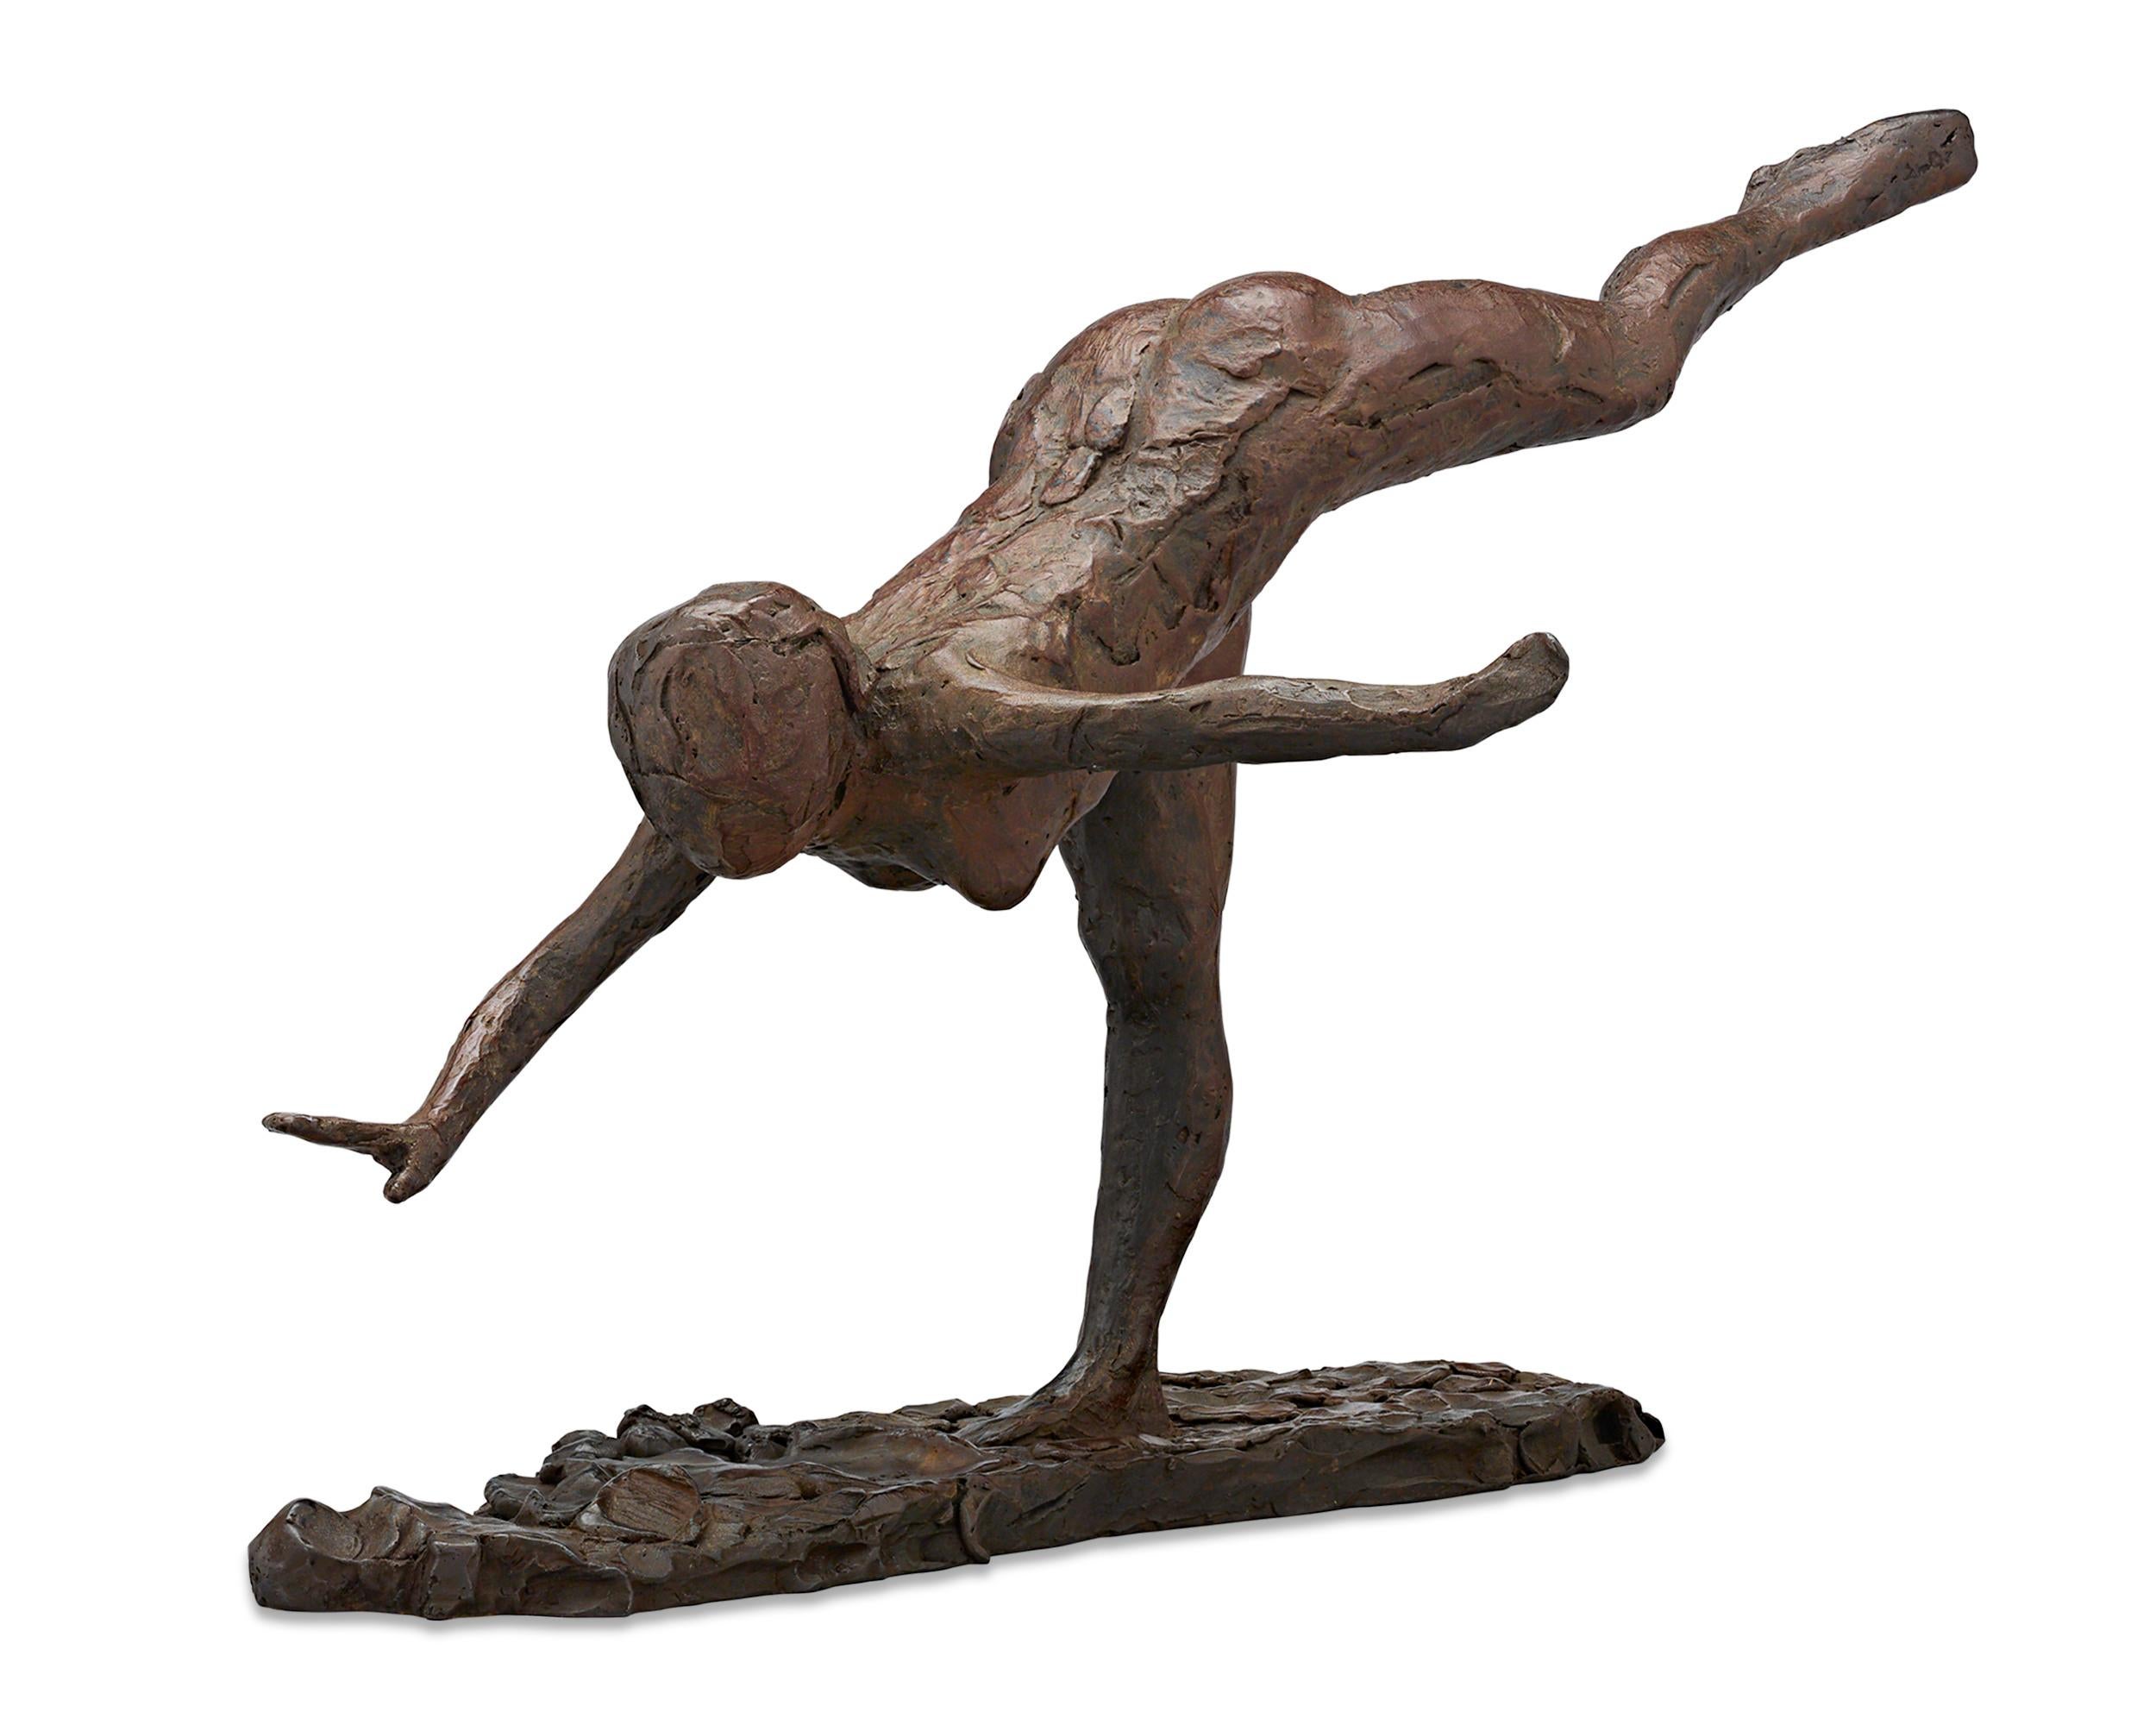 Arabesque on Right Side, Right Hand Close to Earth, Left Arm Outside - Sculpture by Edgar Degas